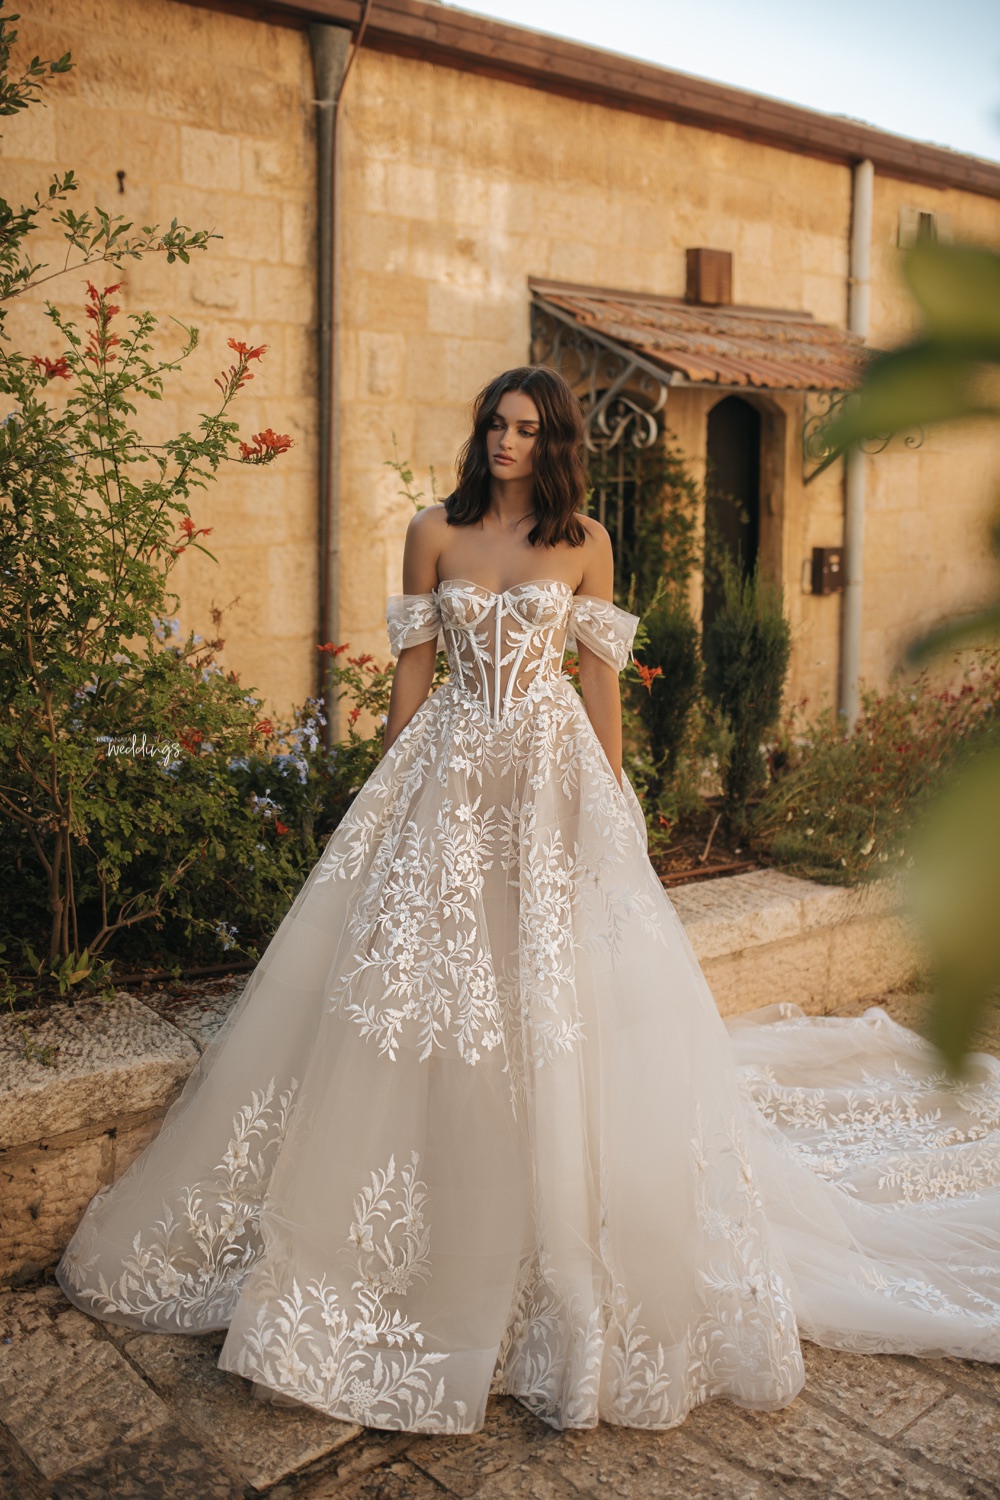 2022 Brides, We've Got Gowns That'll Make You The Talk Of The Town For Centuries